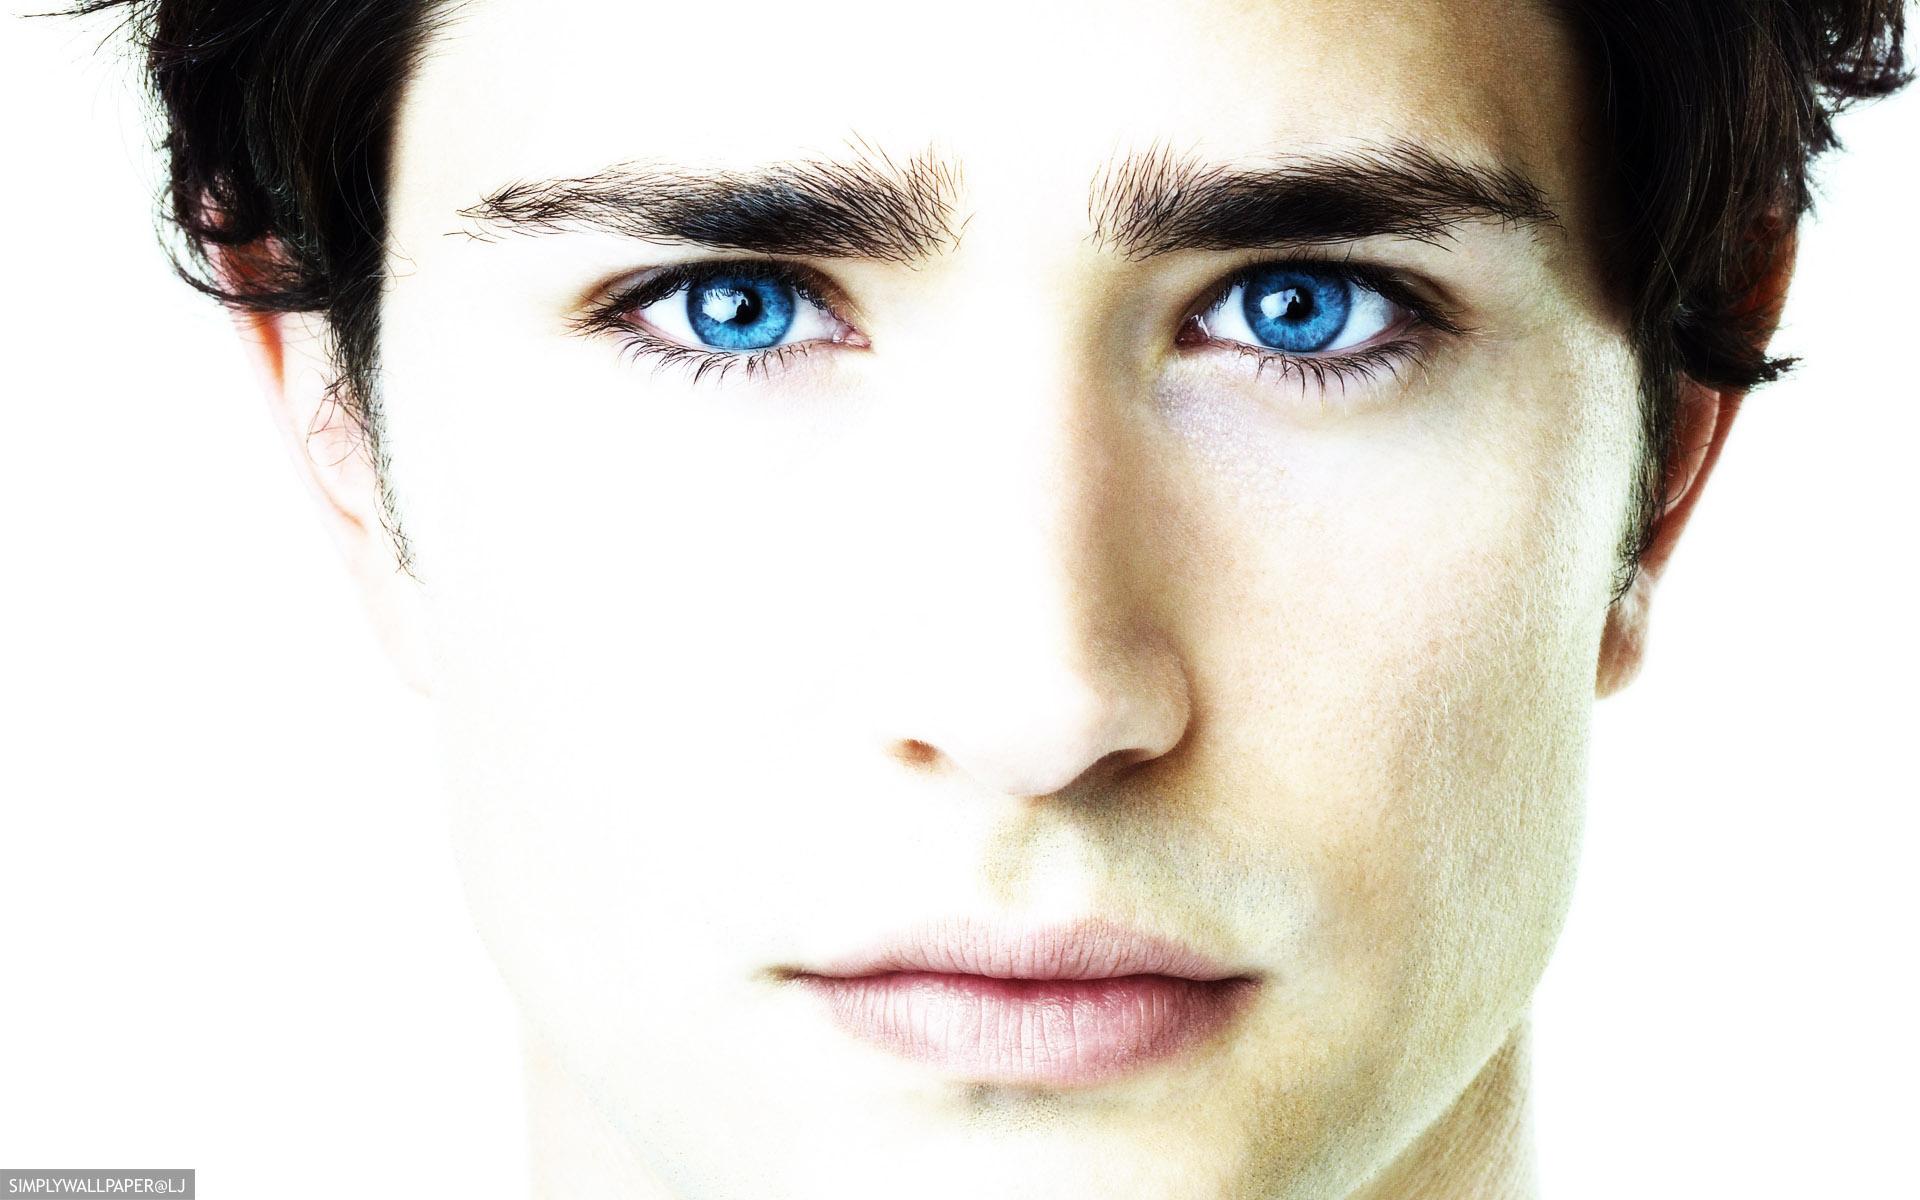 Kyle XY (TV Series): Matt Dallas, Nominee for Saturn Award for Best Actor on Television in 2007. 1920x1200 HD Wallpaper.